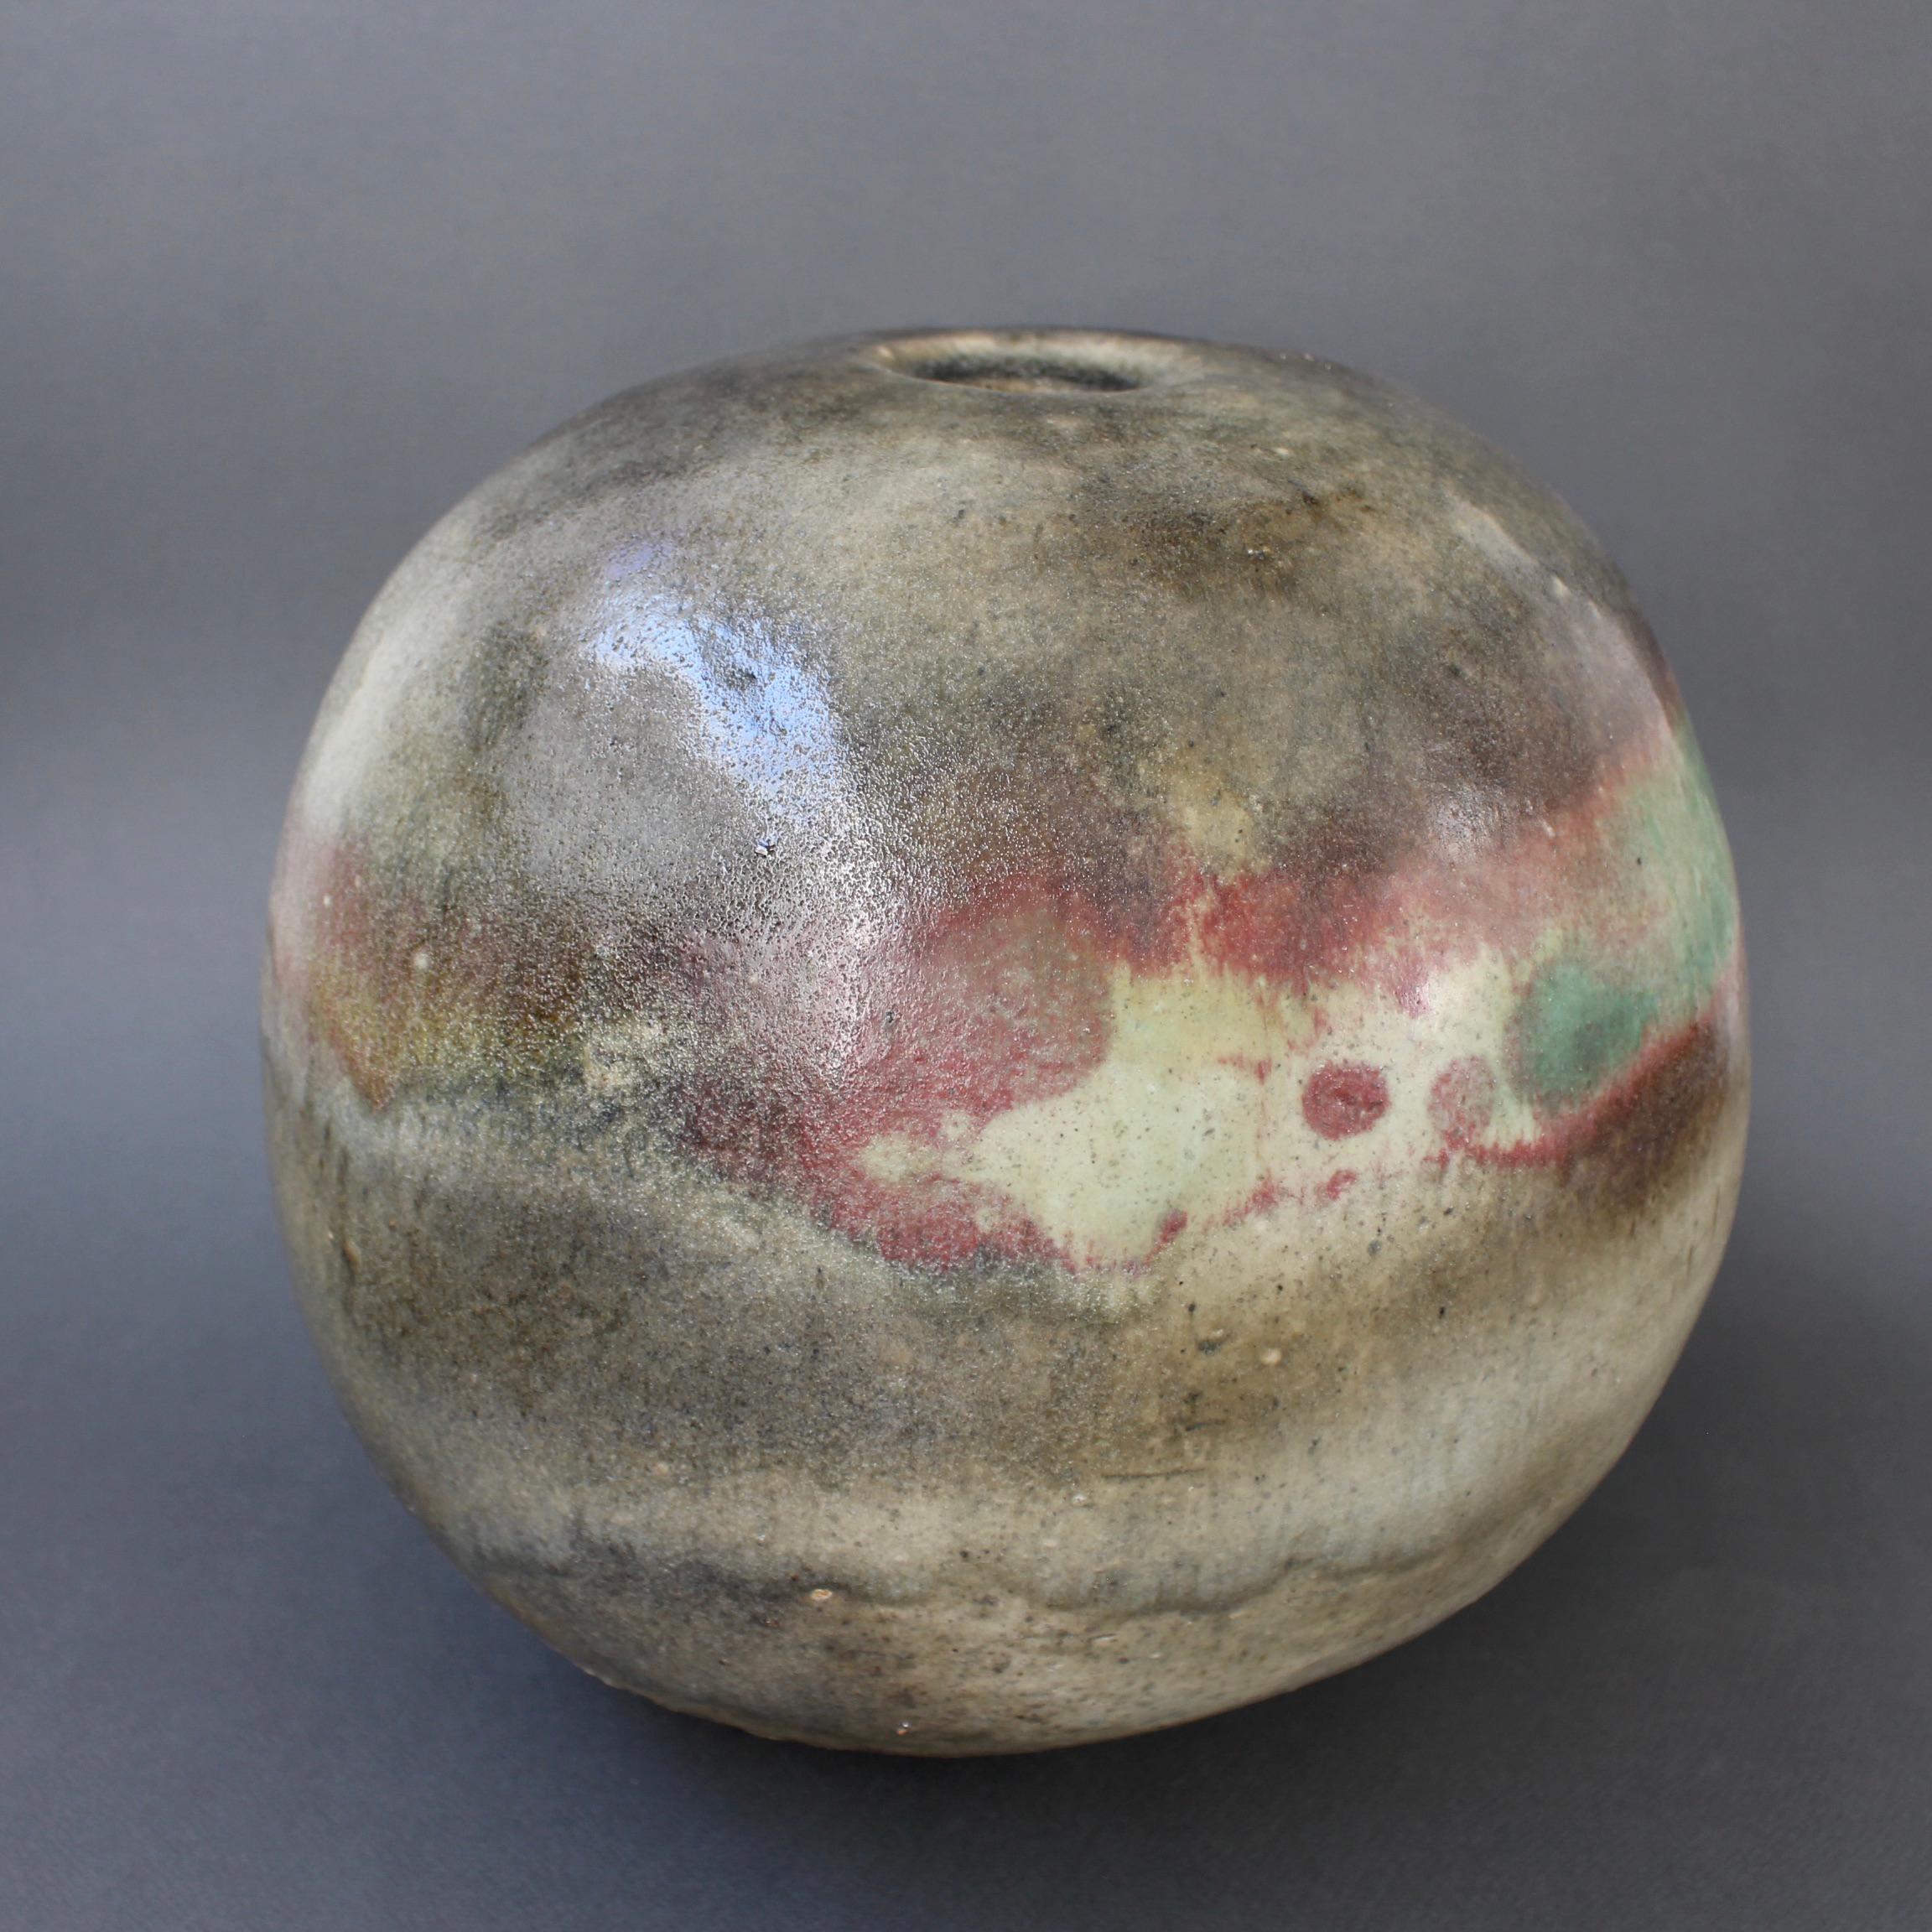 Large spherical stoneware vase by Ingeborg and Bruno Asshoff (circa 1960s). A multi-hued overflow glaze with mulberry and turquoise sections over olive, ochre and hazy grey with a very textured feel. The large spherical shape surprises with the